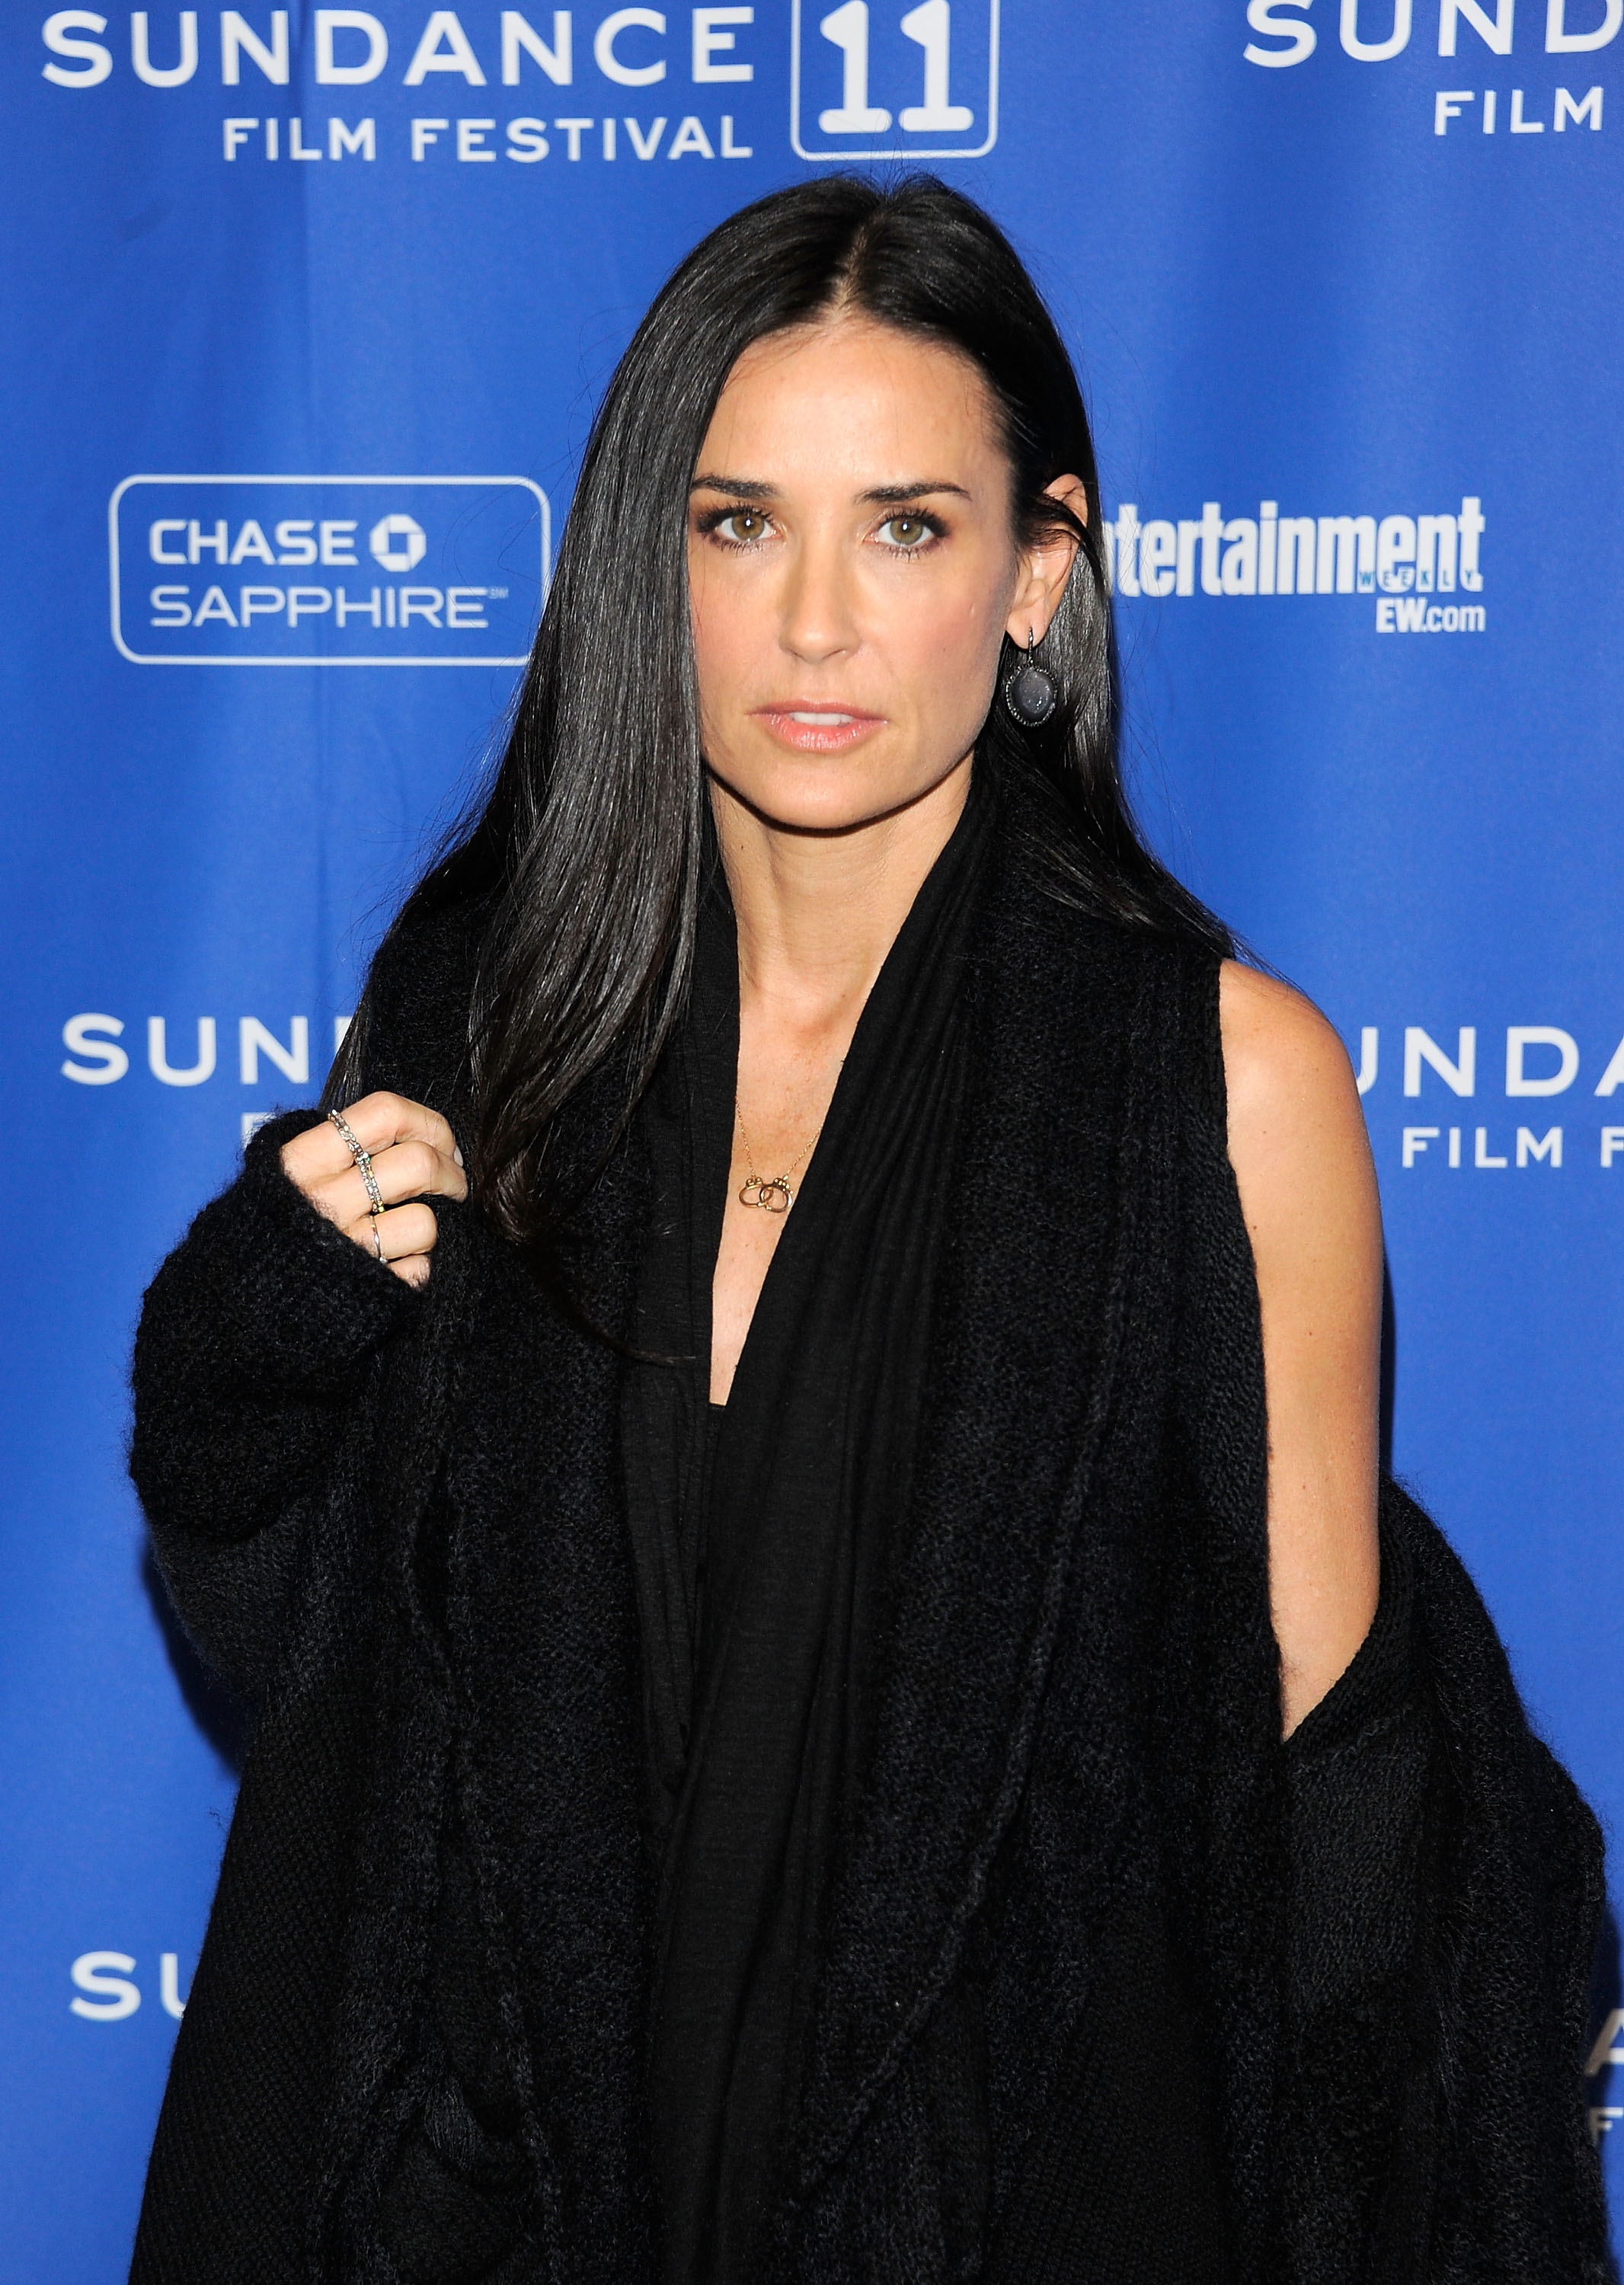 Demi Moore attends the "Another Happy Day" premiere on January 23, 2011 in Park City, Utah | Source: Getty Images